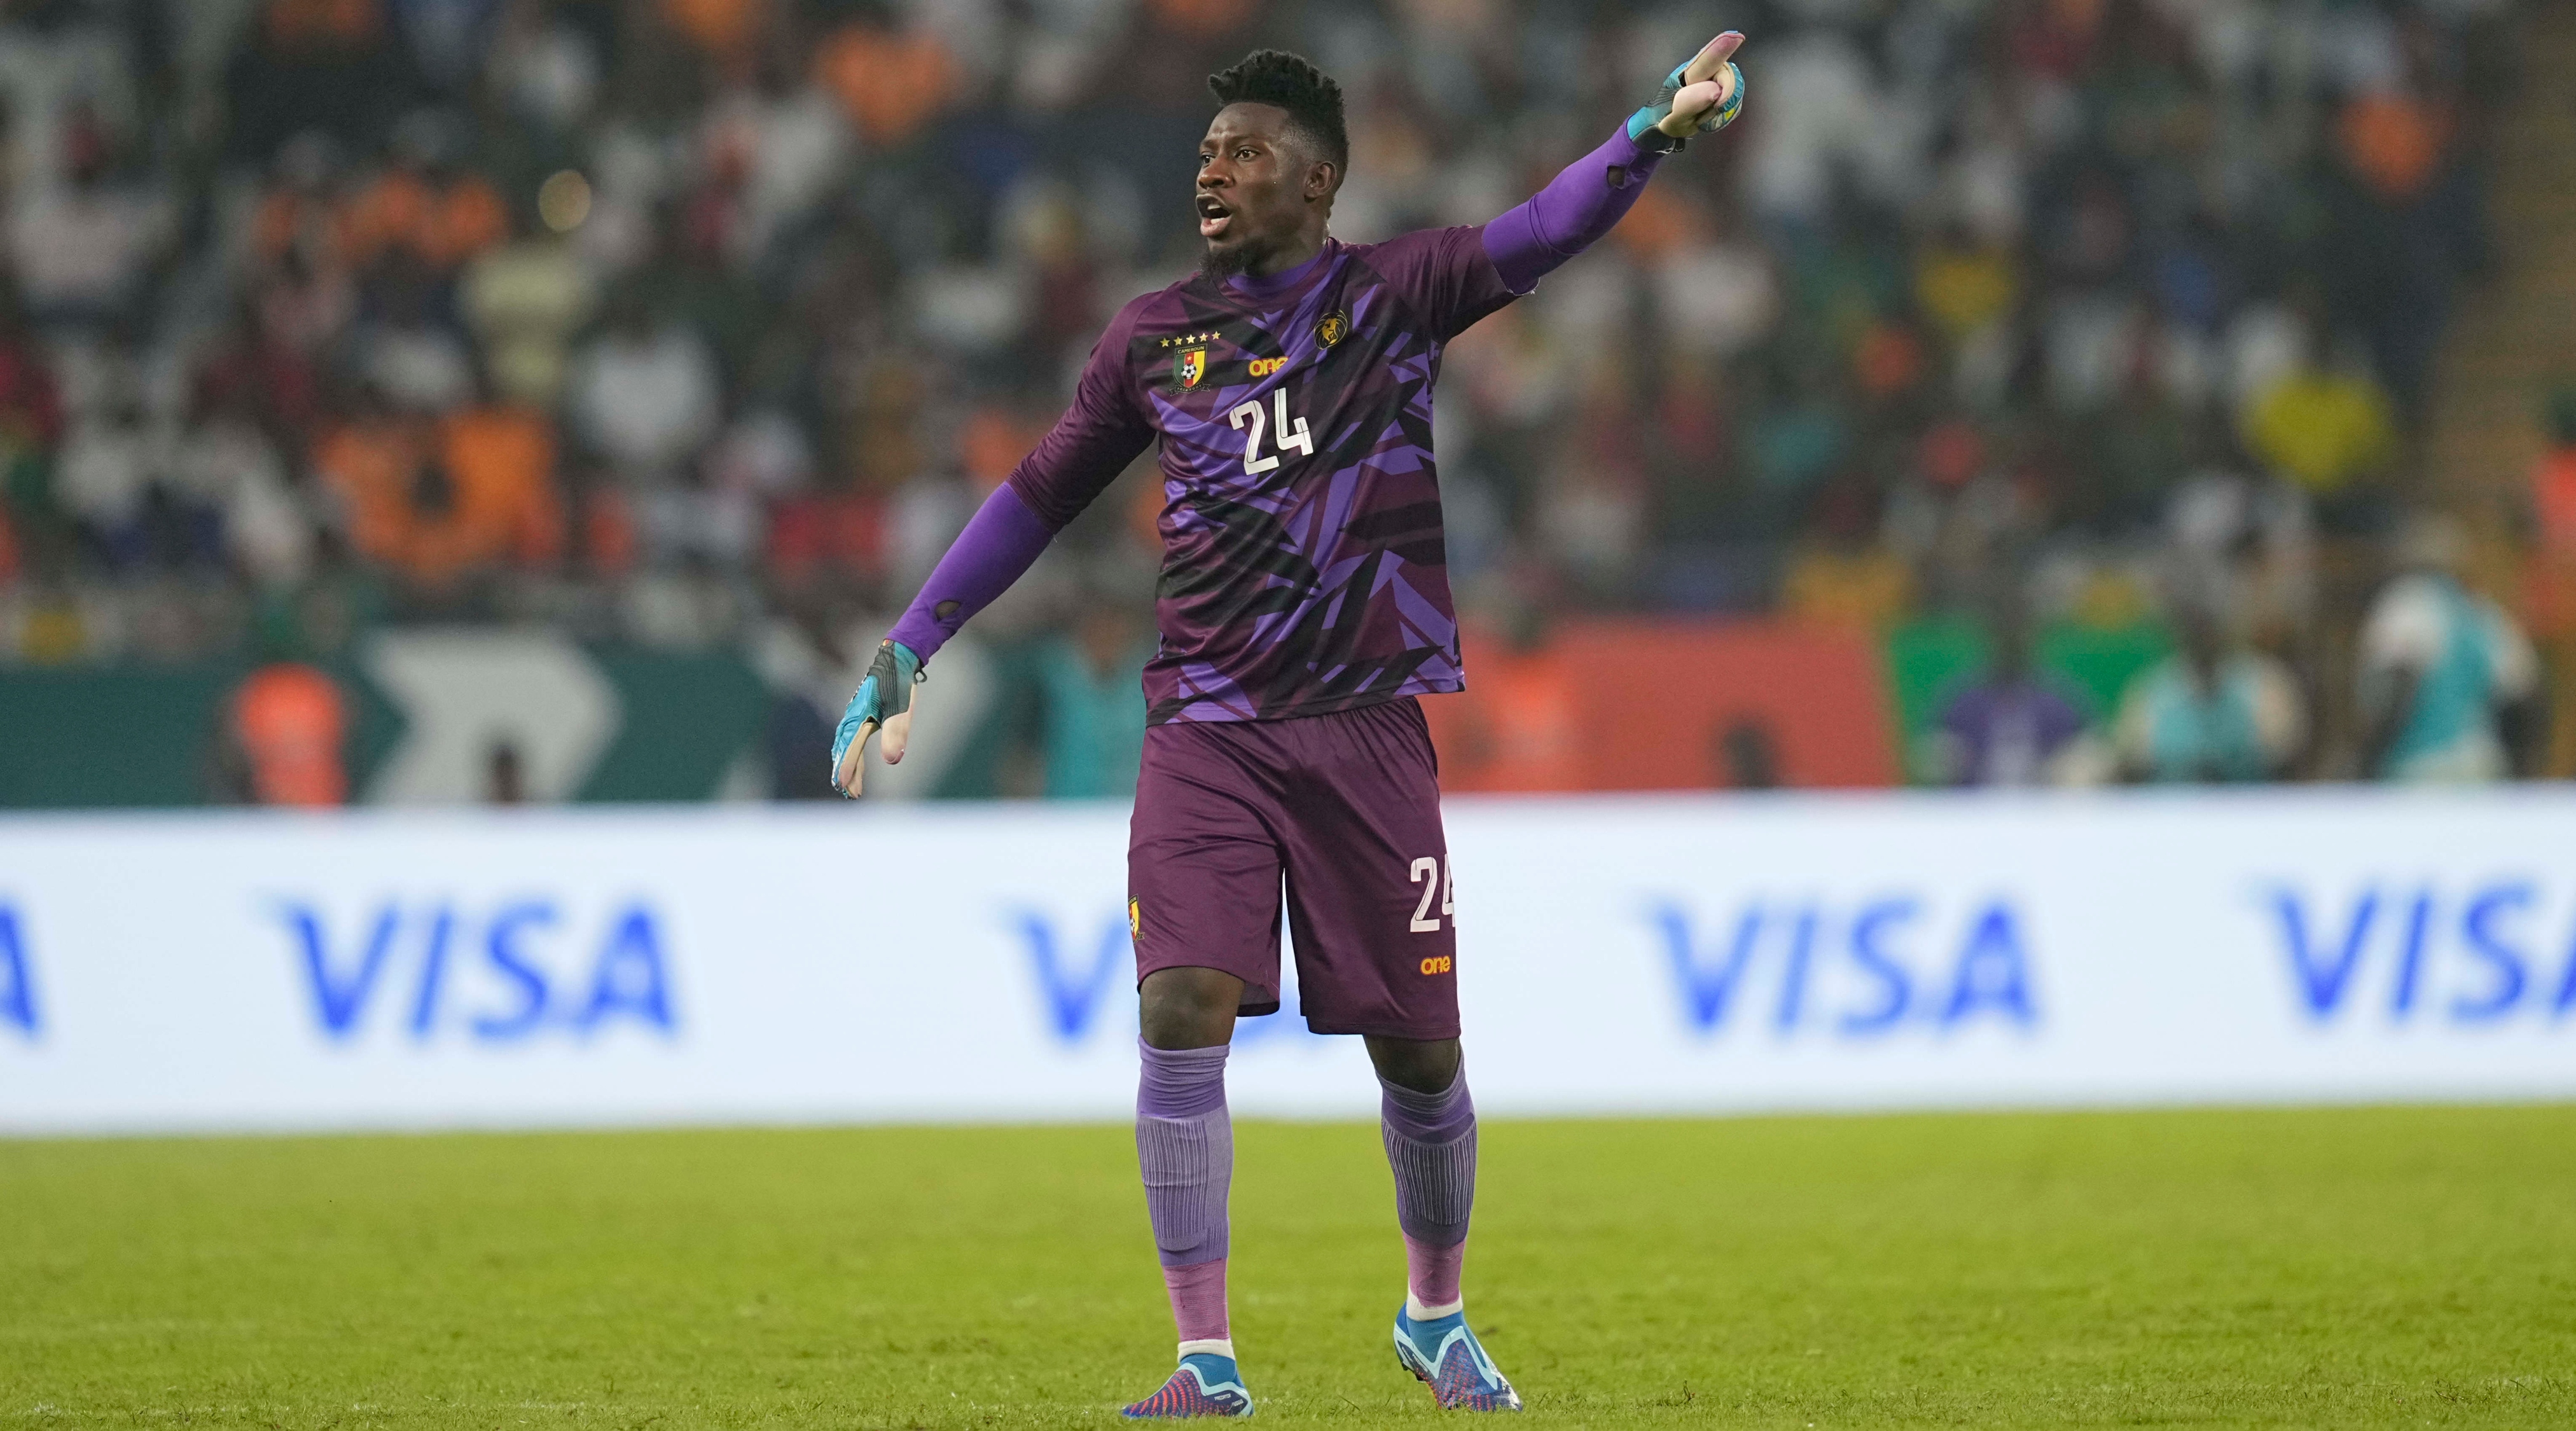 YAMOUSSOUKRO, IVORY COAST - JANUARY 19: Andre Onana Onana of Cameroon during the TotalEnergies CAF Africa Cup of Nations group stage match between Senegal and Cameroon at Stade Charles Konan Banny de Yamoussoukro on January 19, 2024 in Yamoussoukro, Ivory Coast. (Photo by Ulrik Pedersen/DeFodi Images via Getty Images)